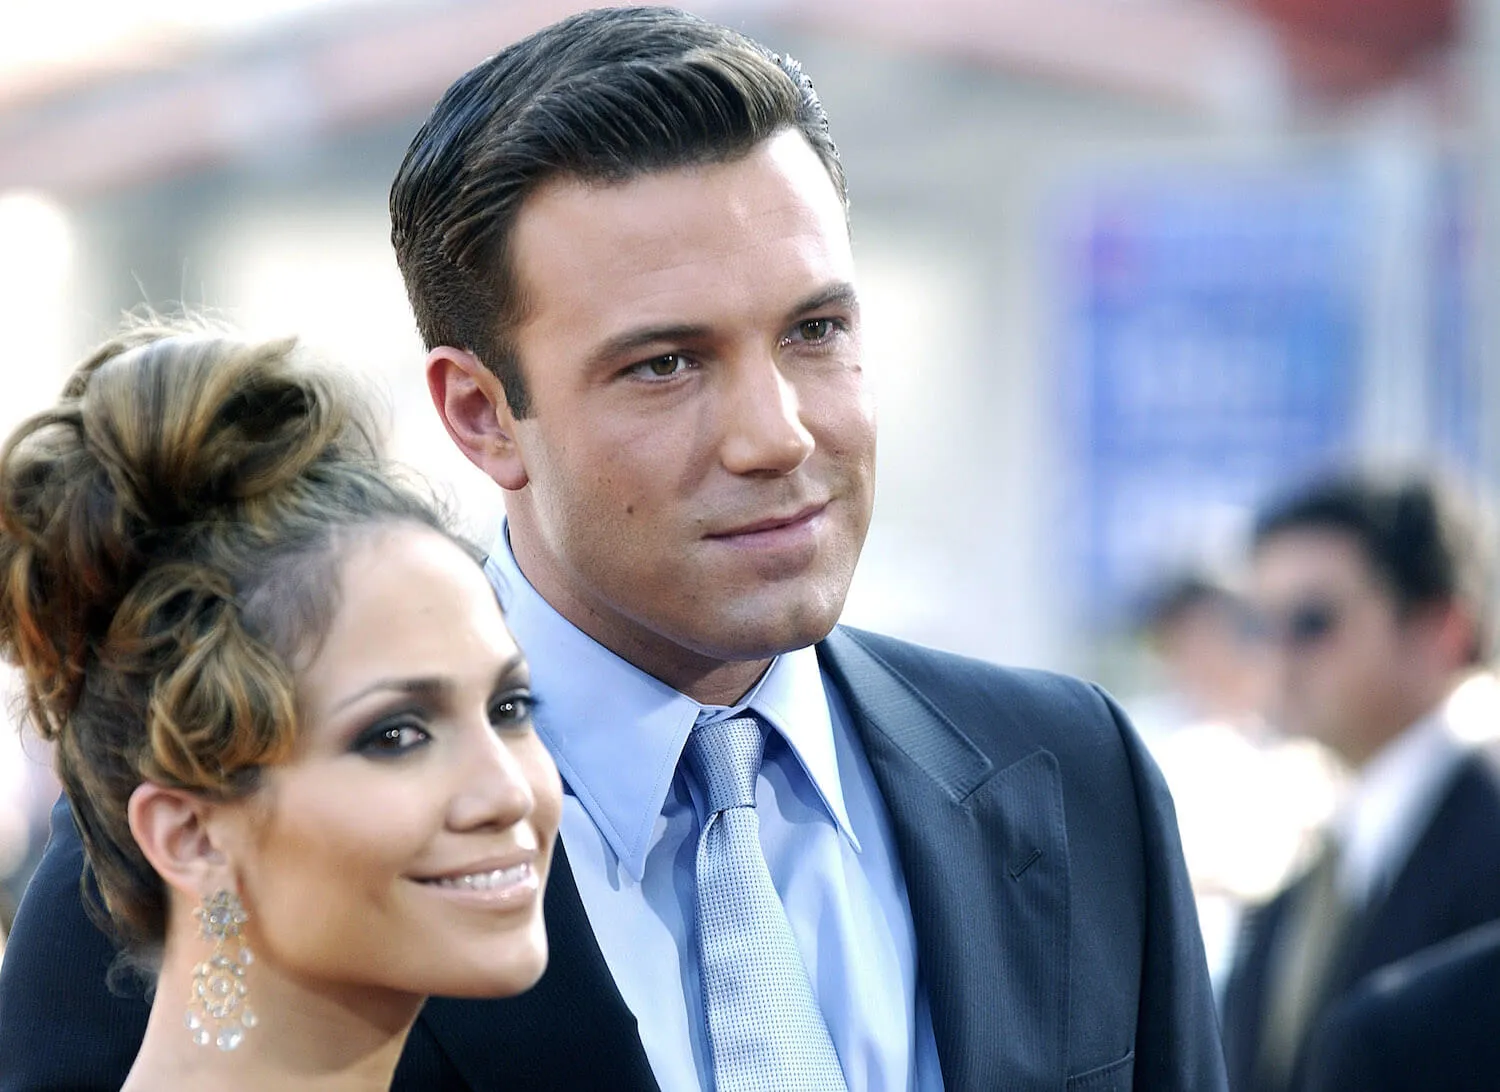 Jennifer Lopez and Ben Affleck smiling at the 'Gigli' premiere